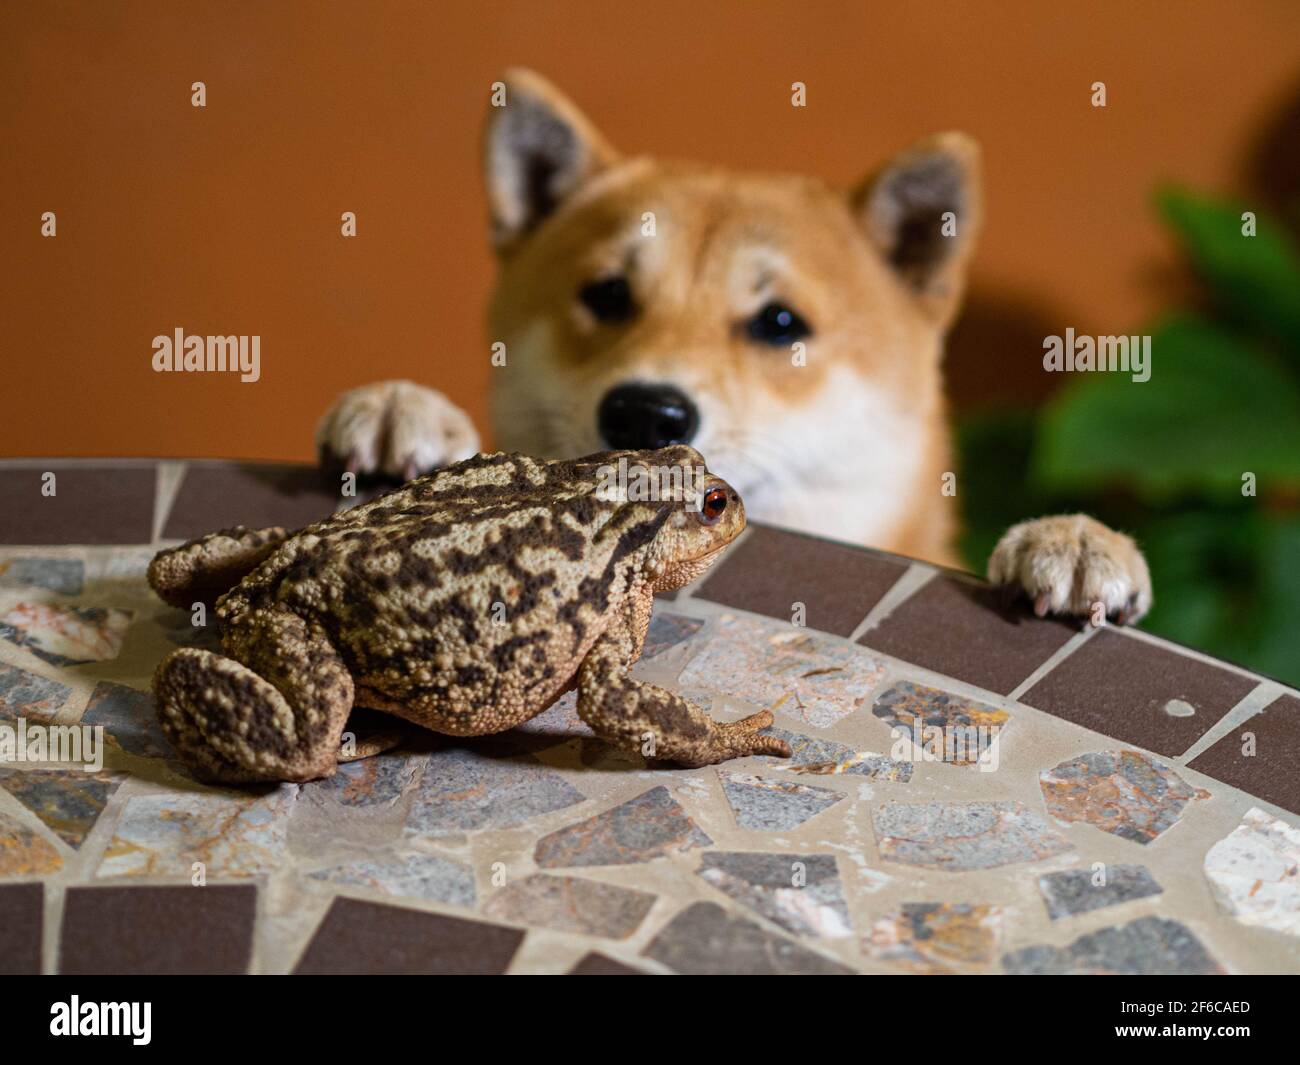 The dog saw a toad sitting on the table Stock Photo